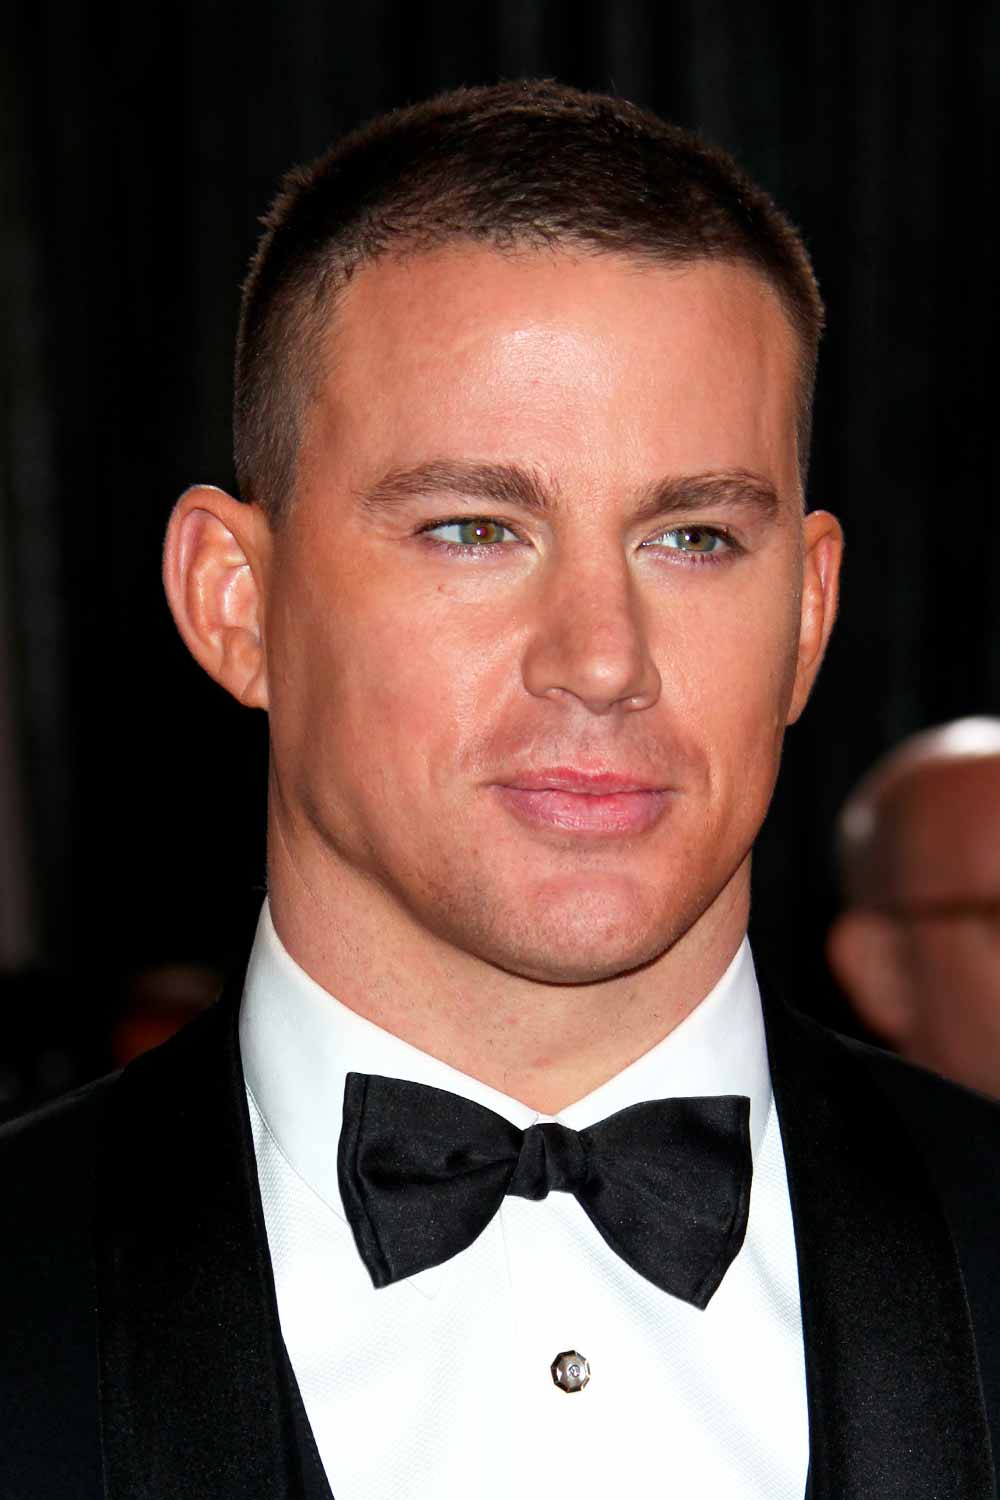 Number 4 Haircut Channing Tatum #haircutnumbers #hairclippersizes